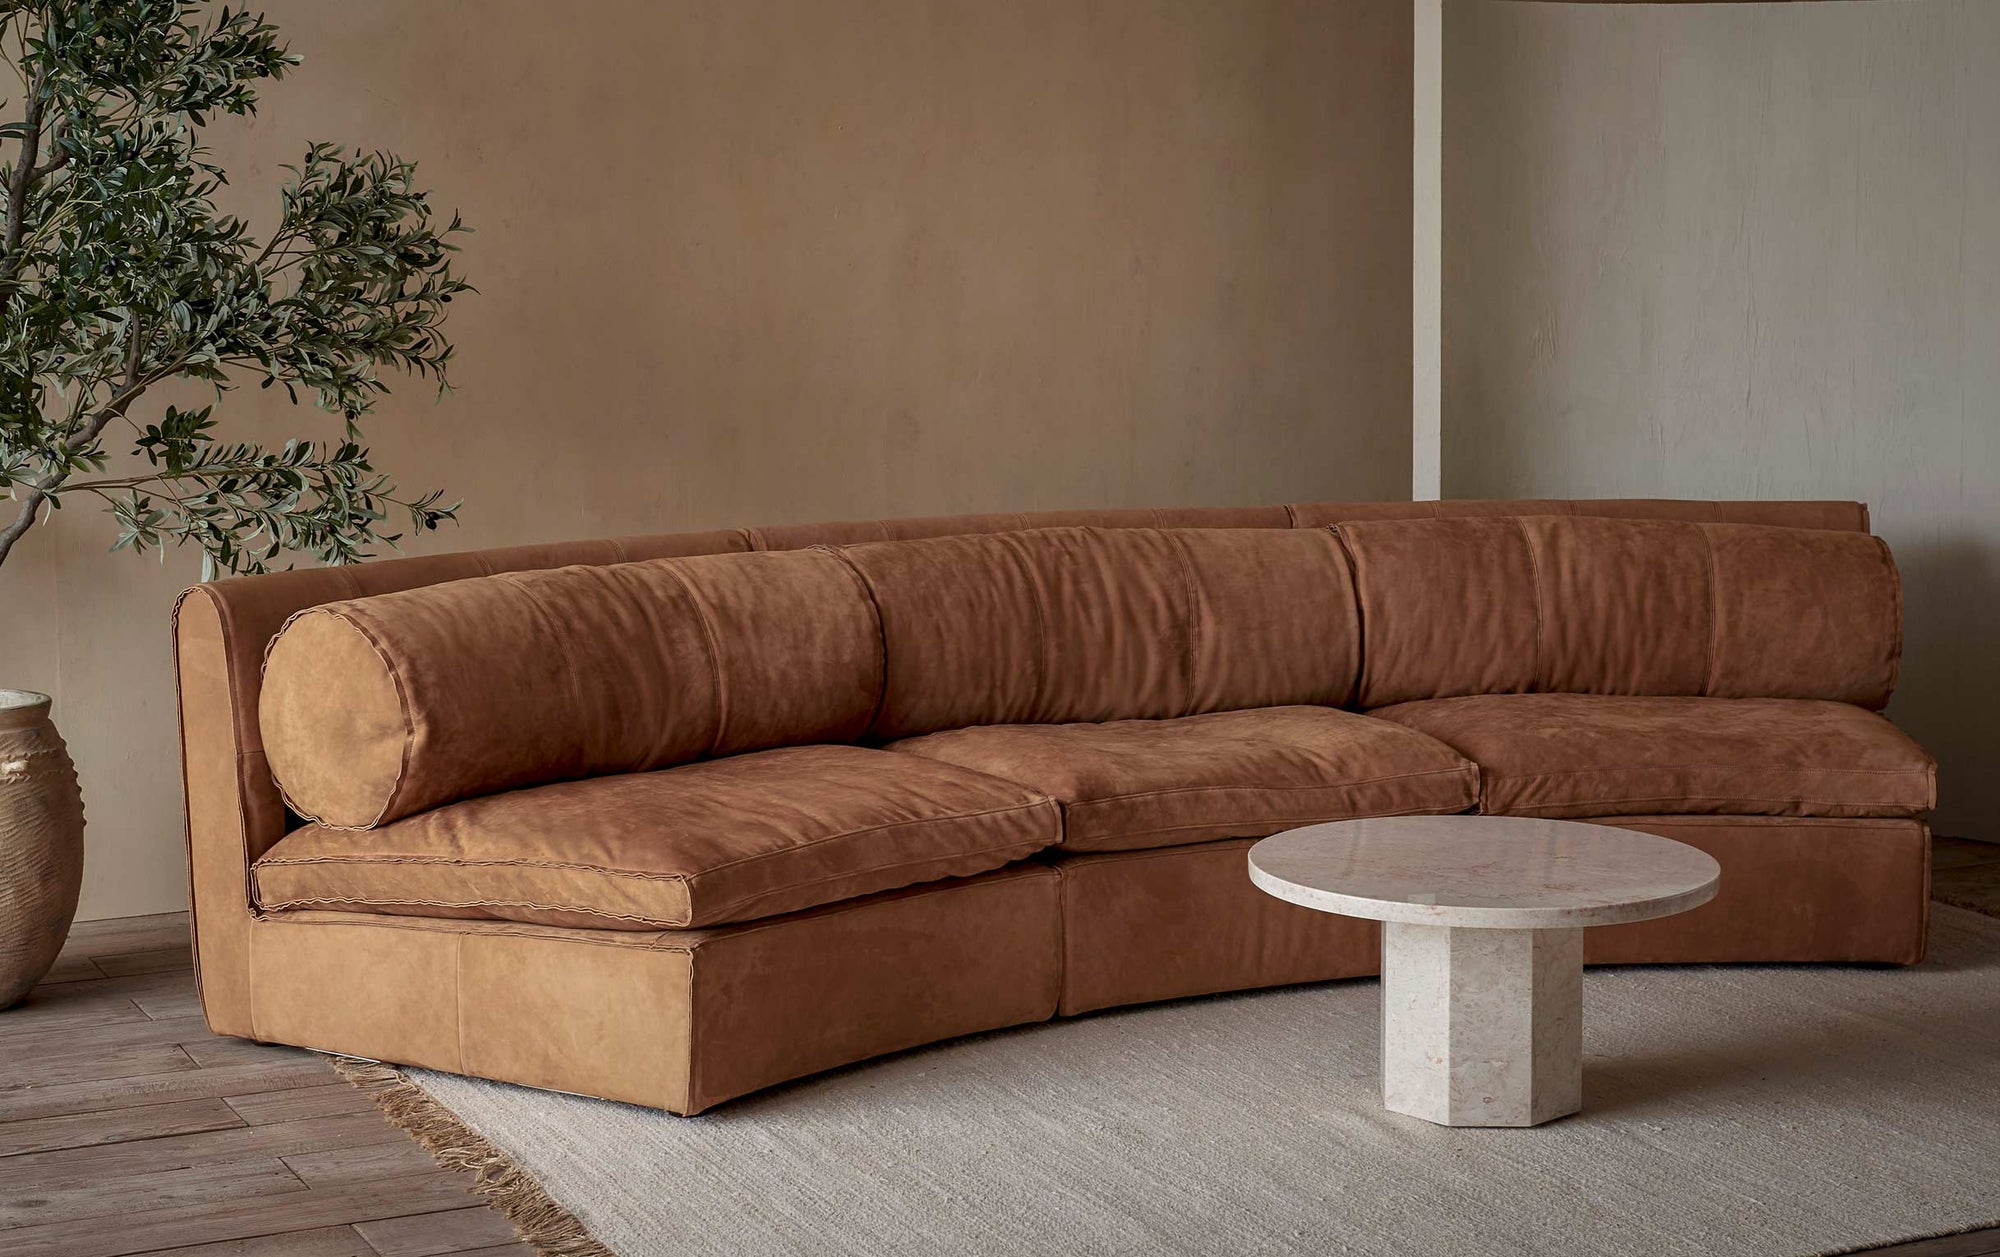 Camino Leather Sectional Sofa in Sunset Canyon, a cognac brown Meridian Leather placed in a room with a coffee table